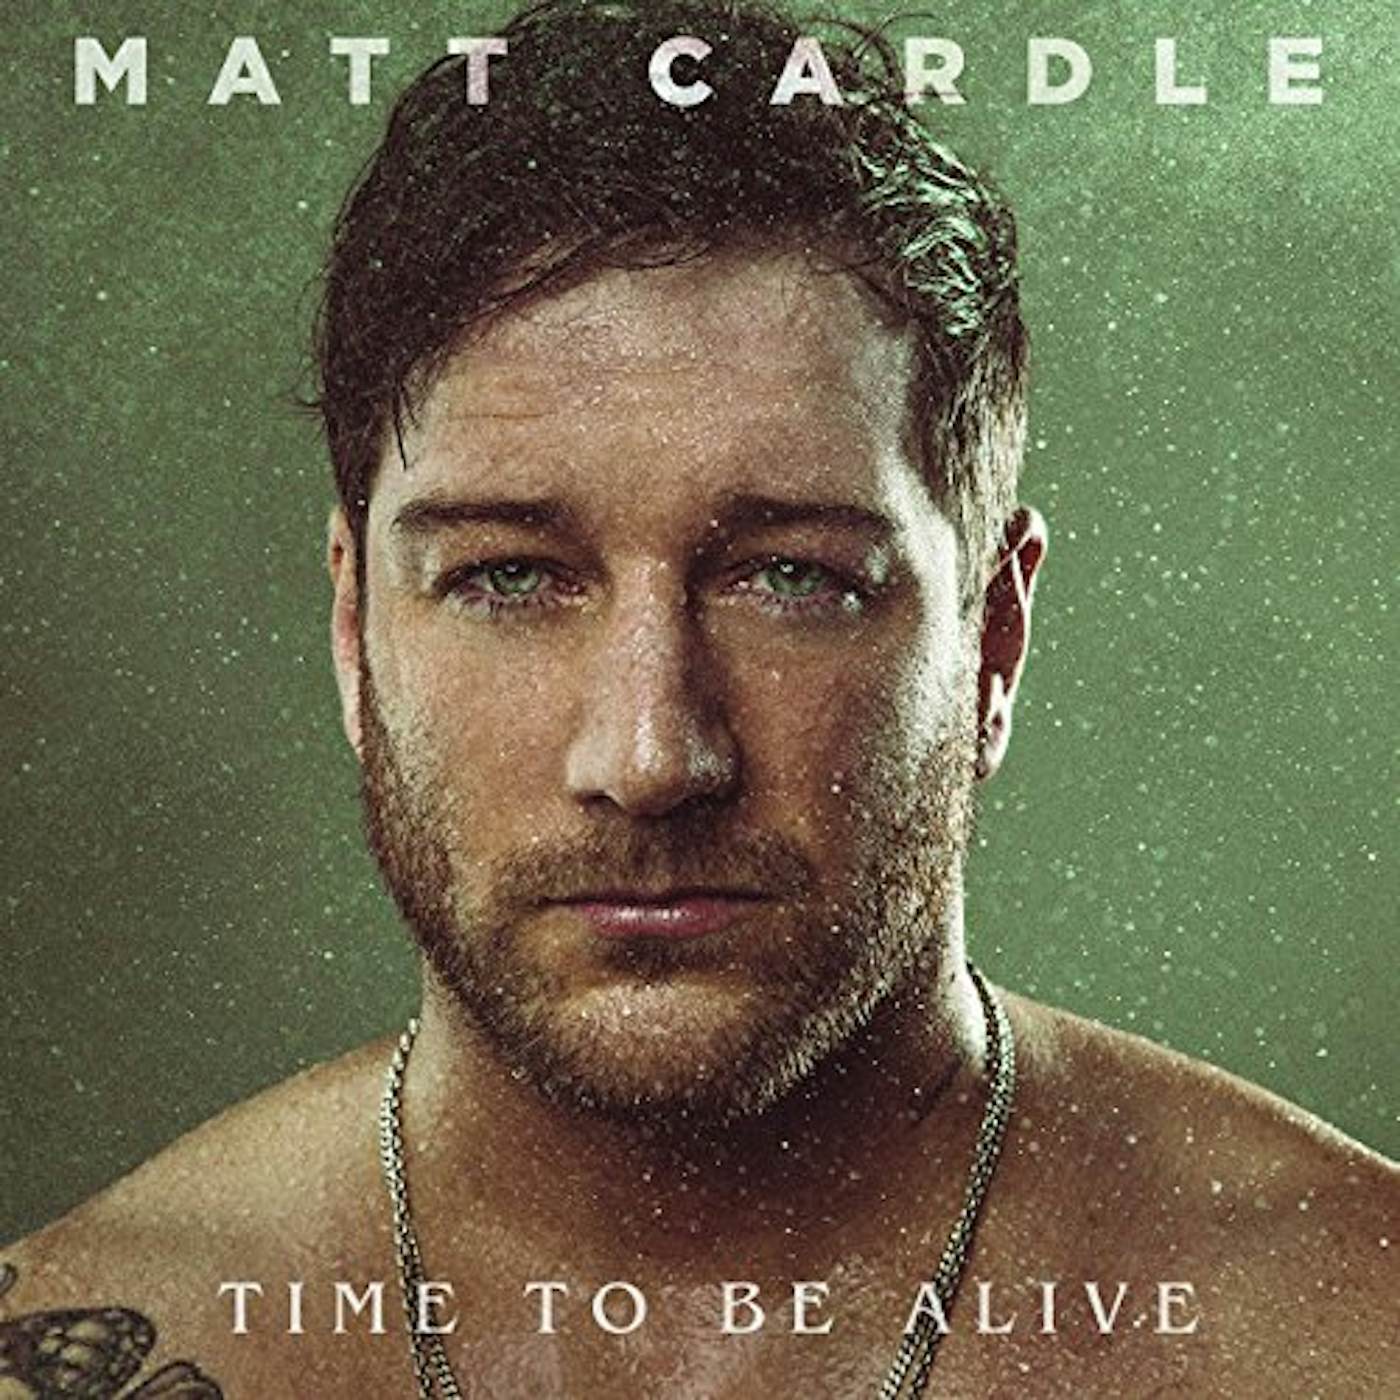 Matt Cardle Time to Be Alive Vinyl Record